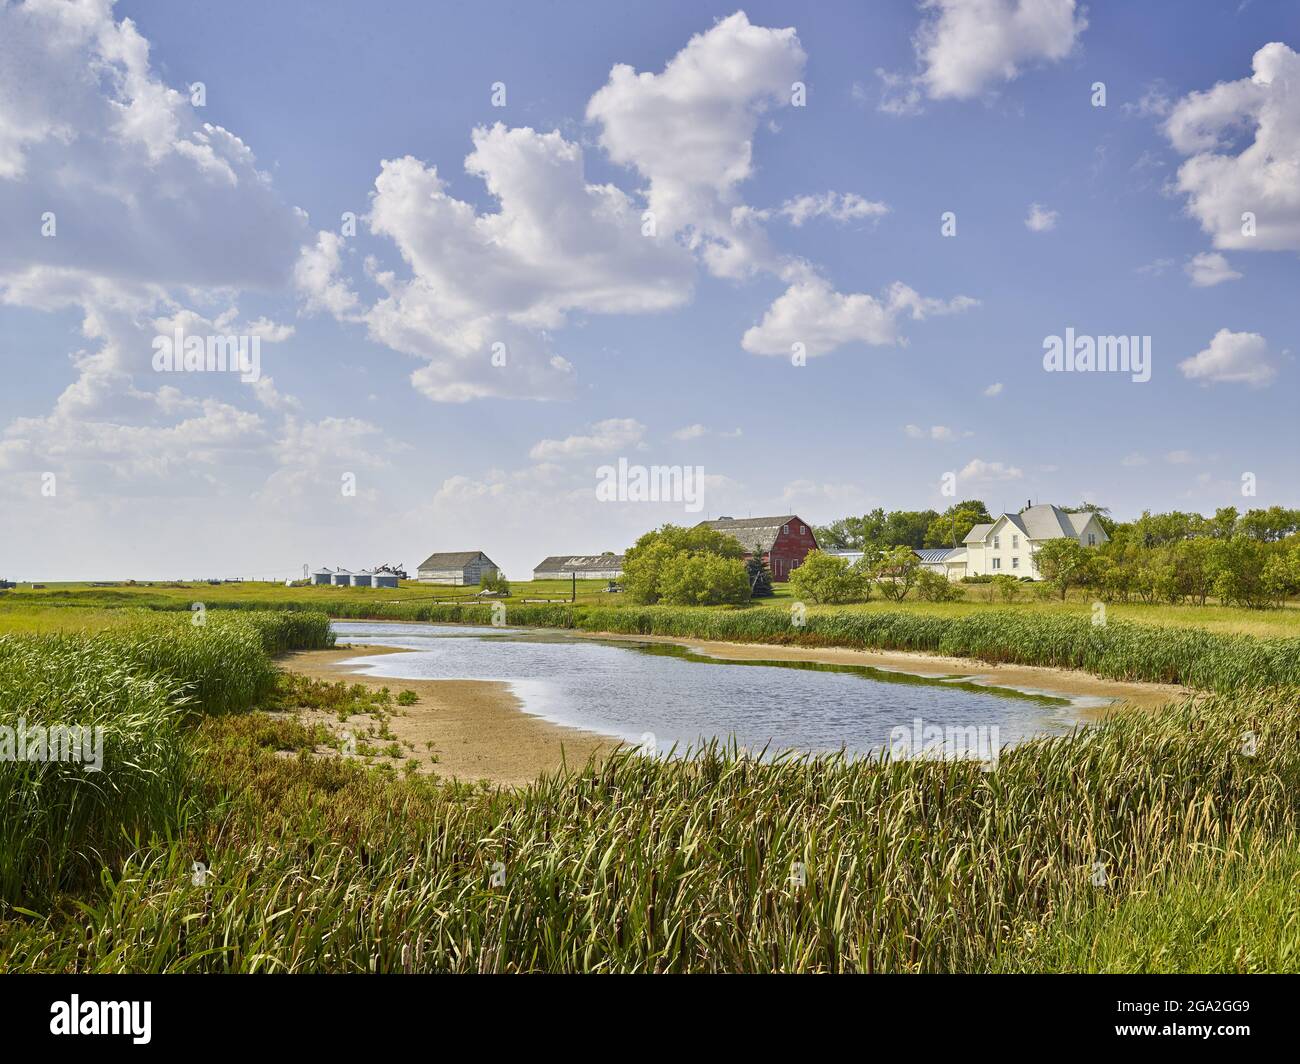 Picturesque view of Zimmerman Road Country Farm with grassy fields and a pond under a blue sky with puffy white clouds Stock Photo